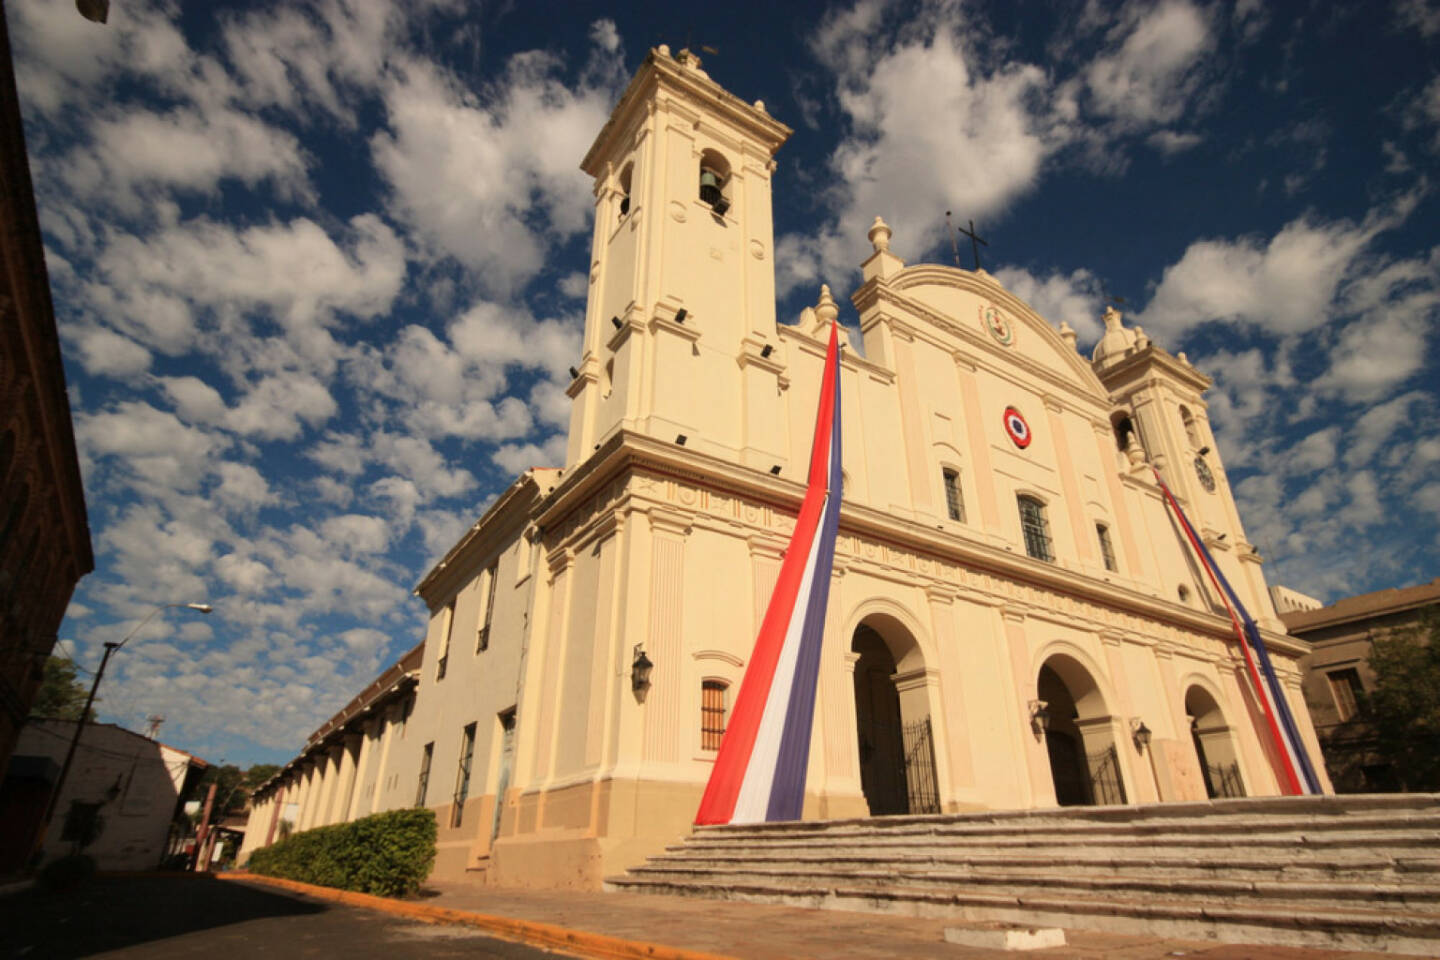 Asuncion, Paraguay, http://www.shutterstock.com/de/pic-106037669/stock-photo-beautiful-catholic-national-cathedral-from-different-angle-in-capital-asuncion-paraguay-south.html